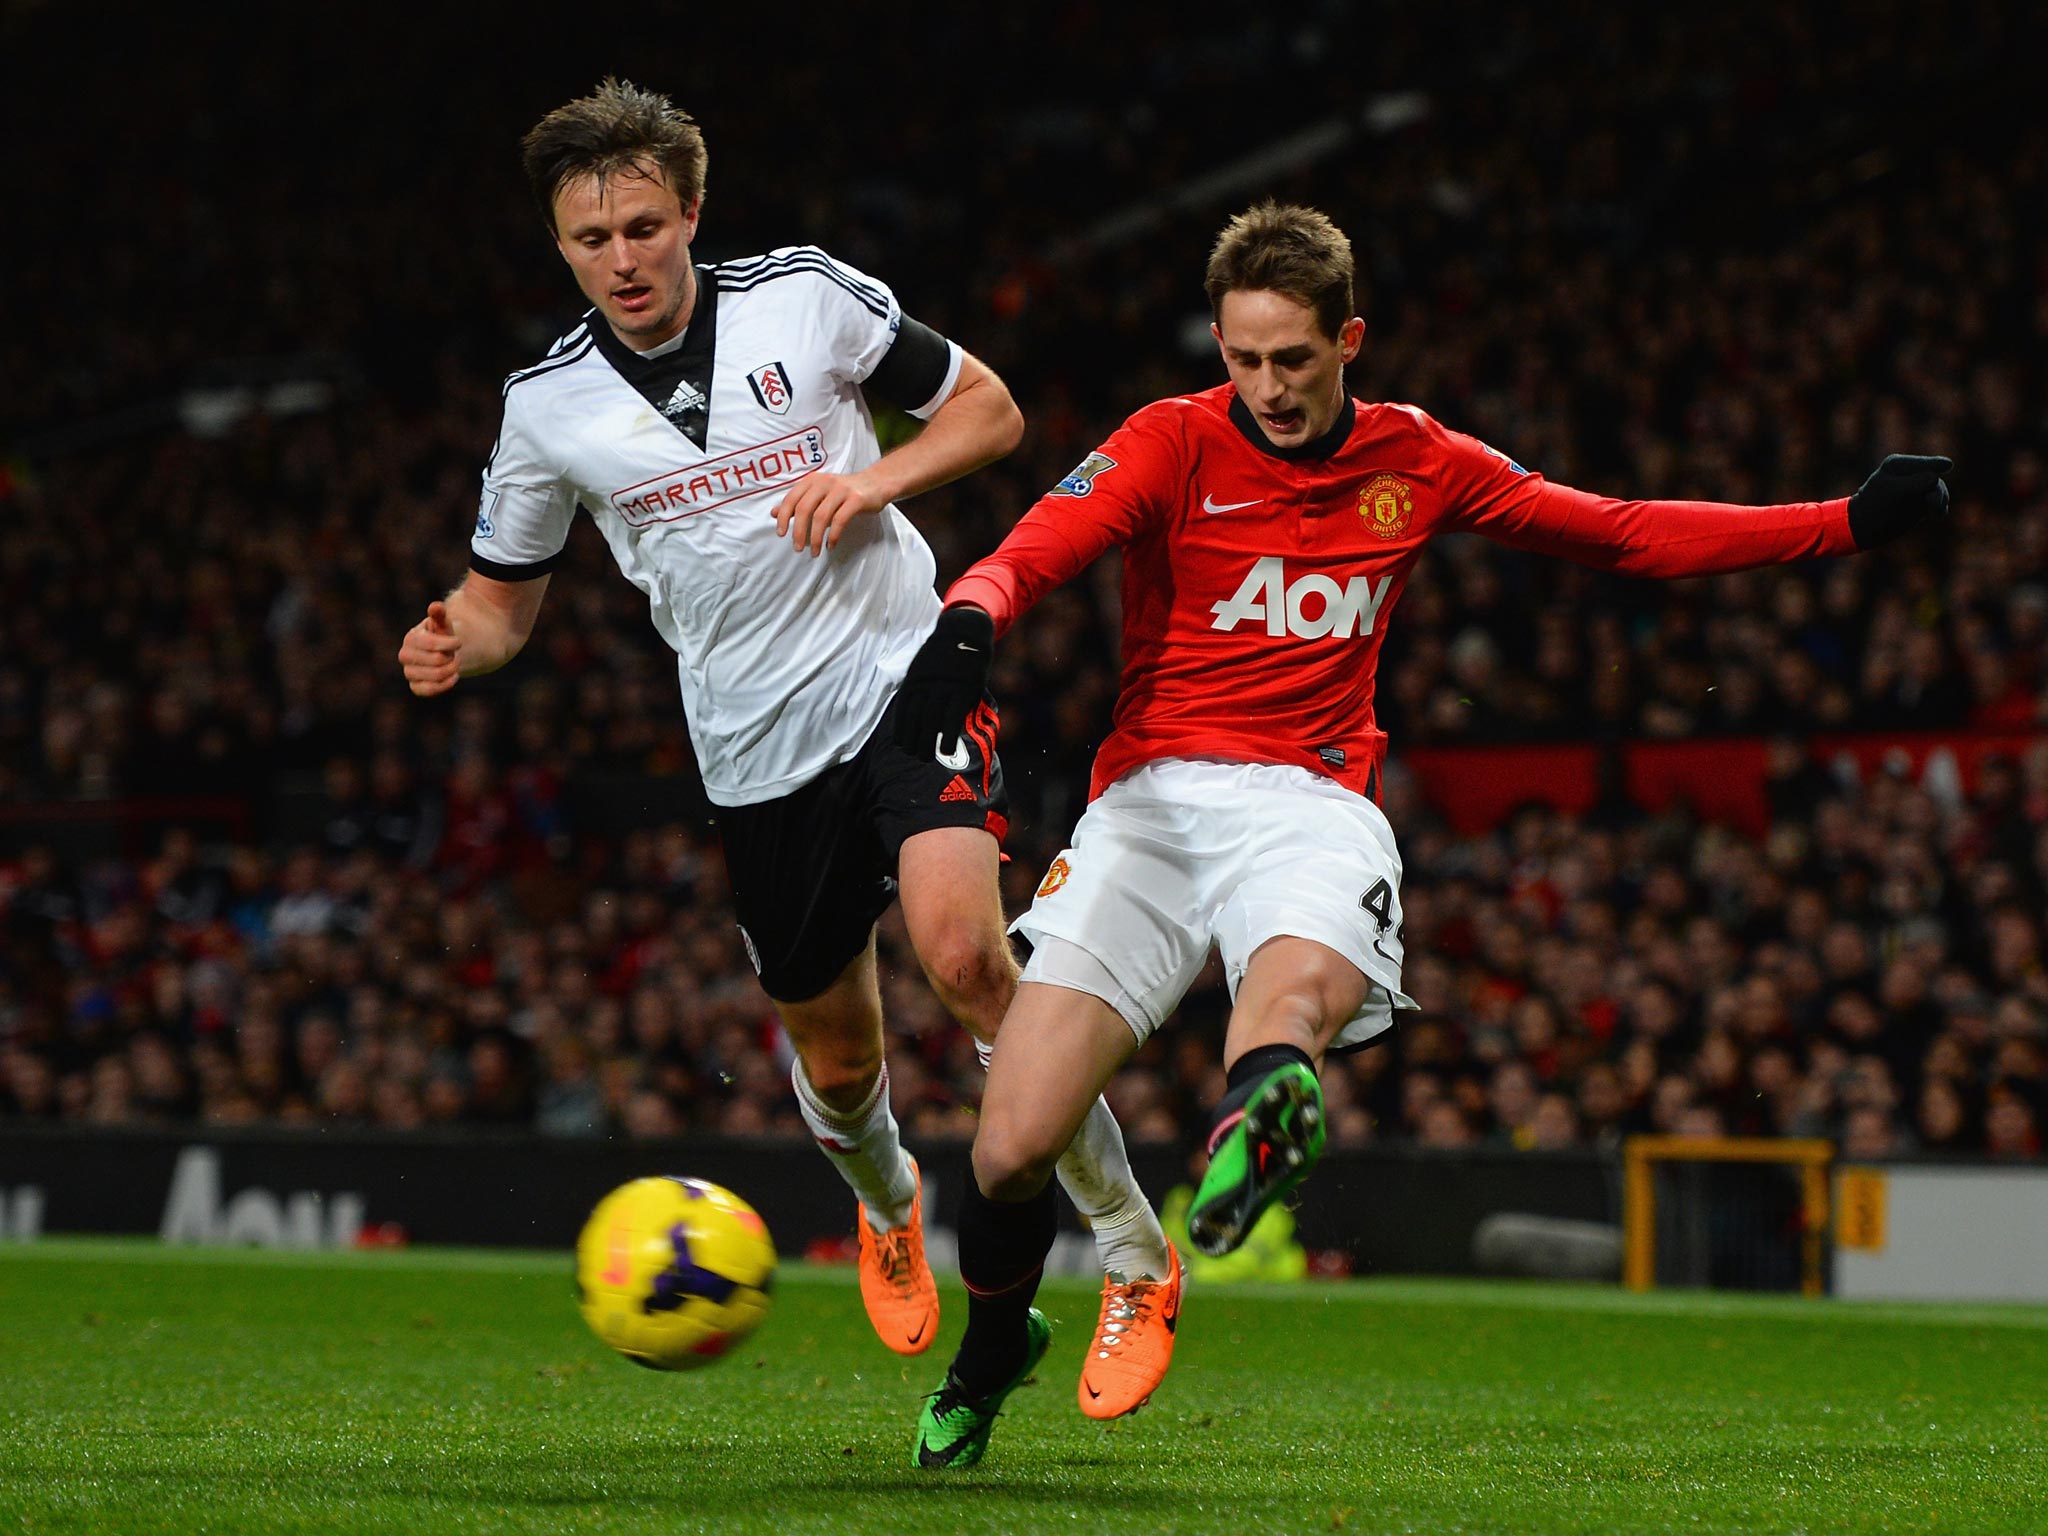 William Kvist of Fulham competes with Adnan Januzaj (right) of Manchester United